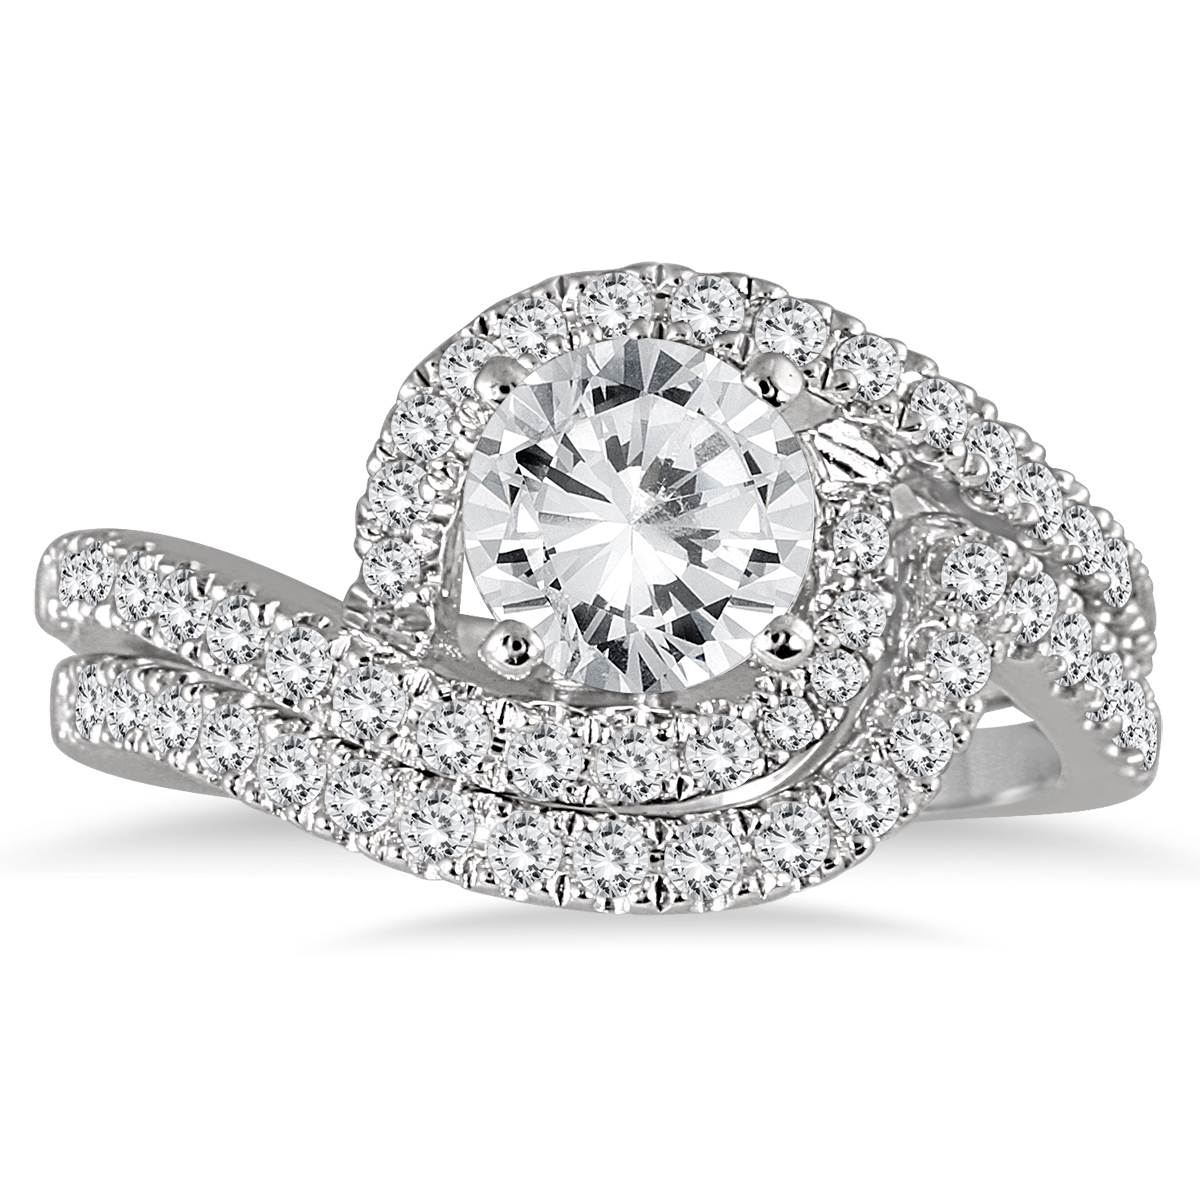 Image of AGS Certified 1 1/2 Carat TW Curved Diamond Bridal Set in 14K White Gold (H-I Color I1-I2 Clarity)